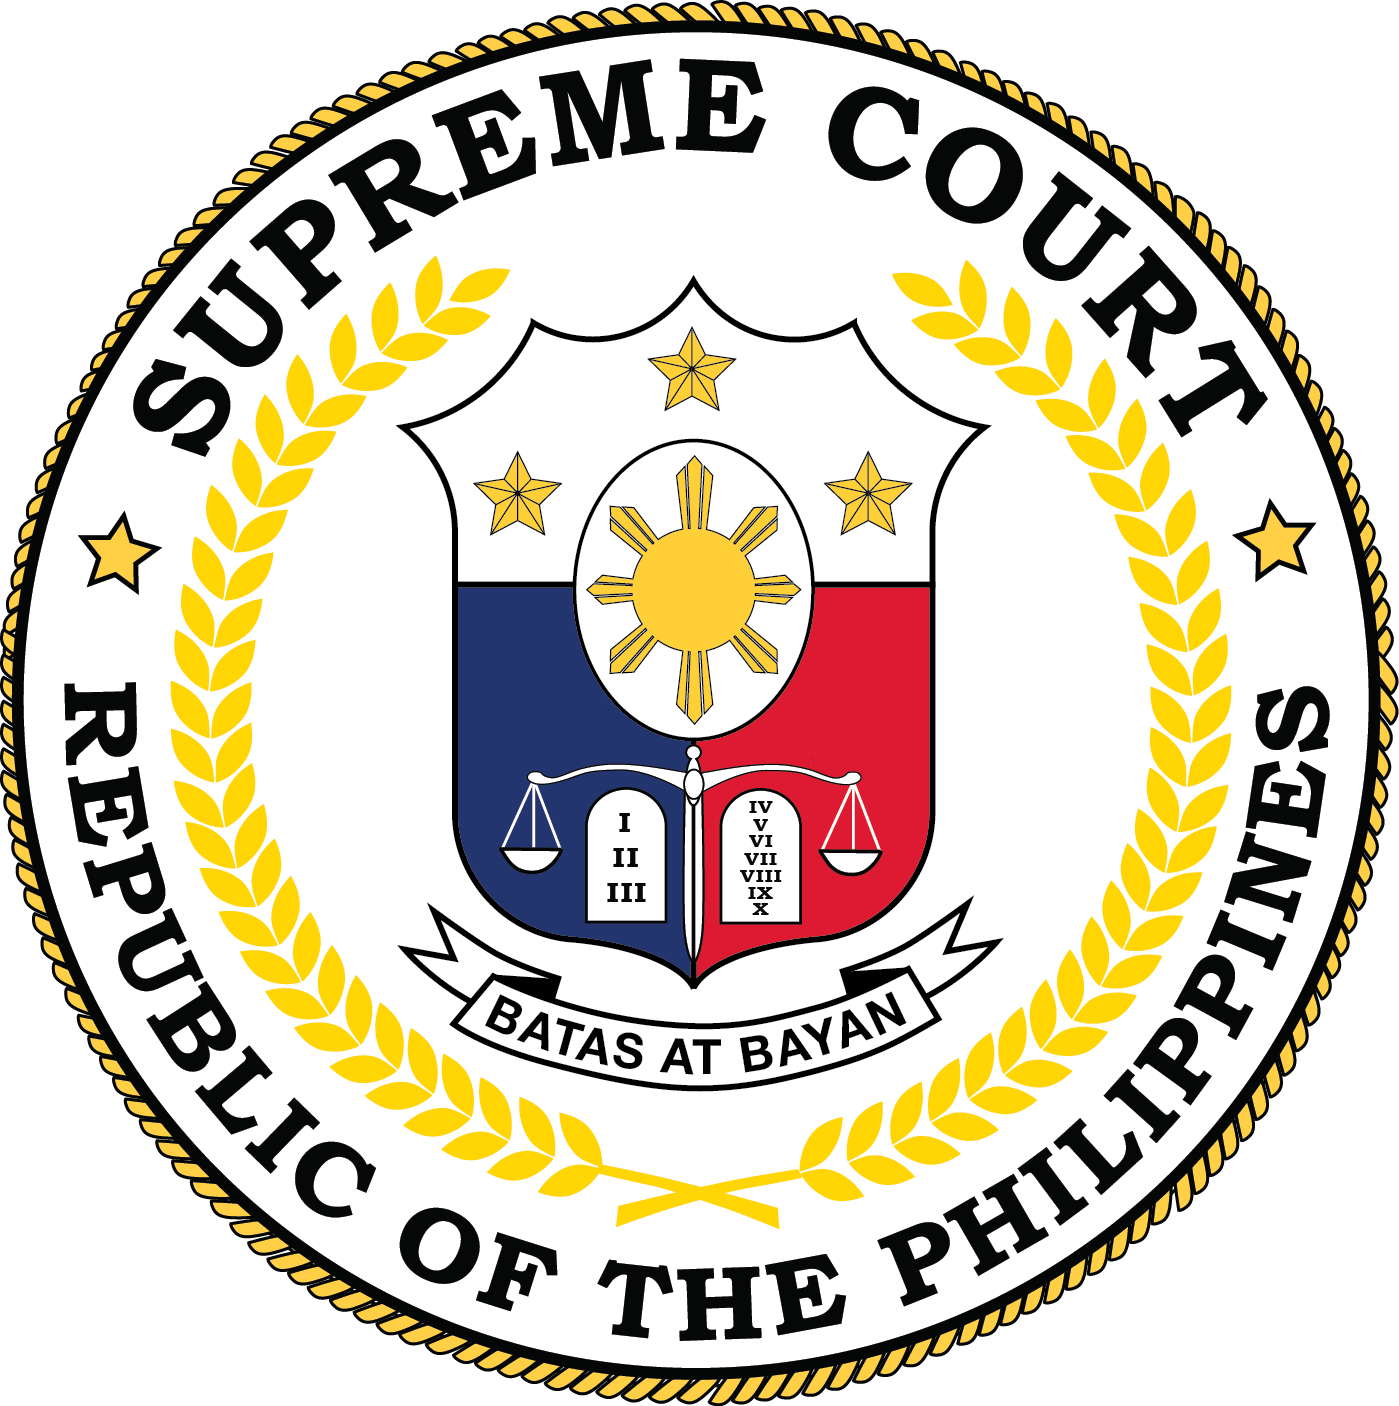 Judiciary Logo - The Supreme Court. Official Gazette of the Republic of the Philippines